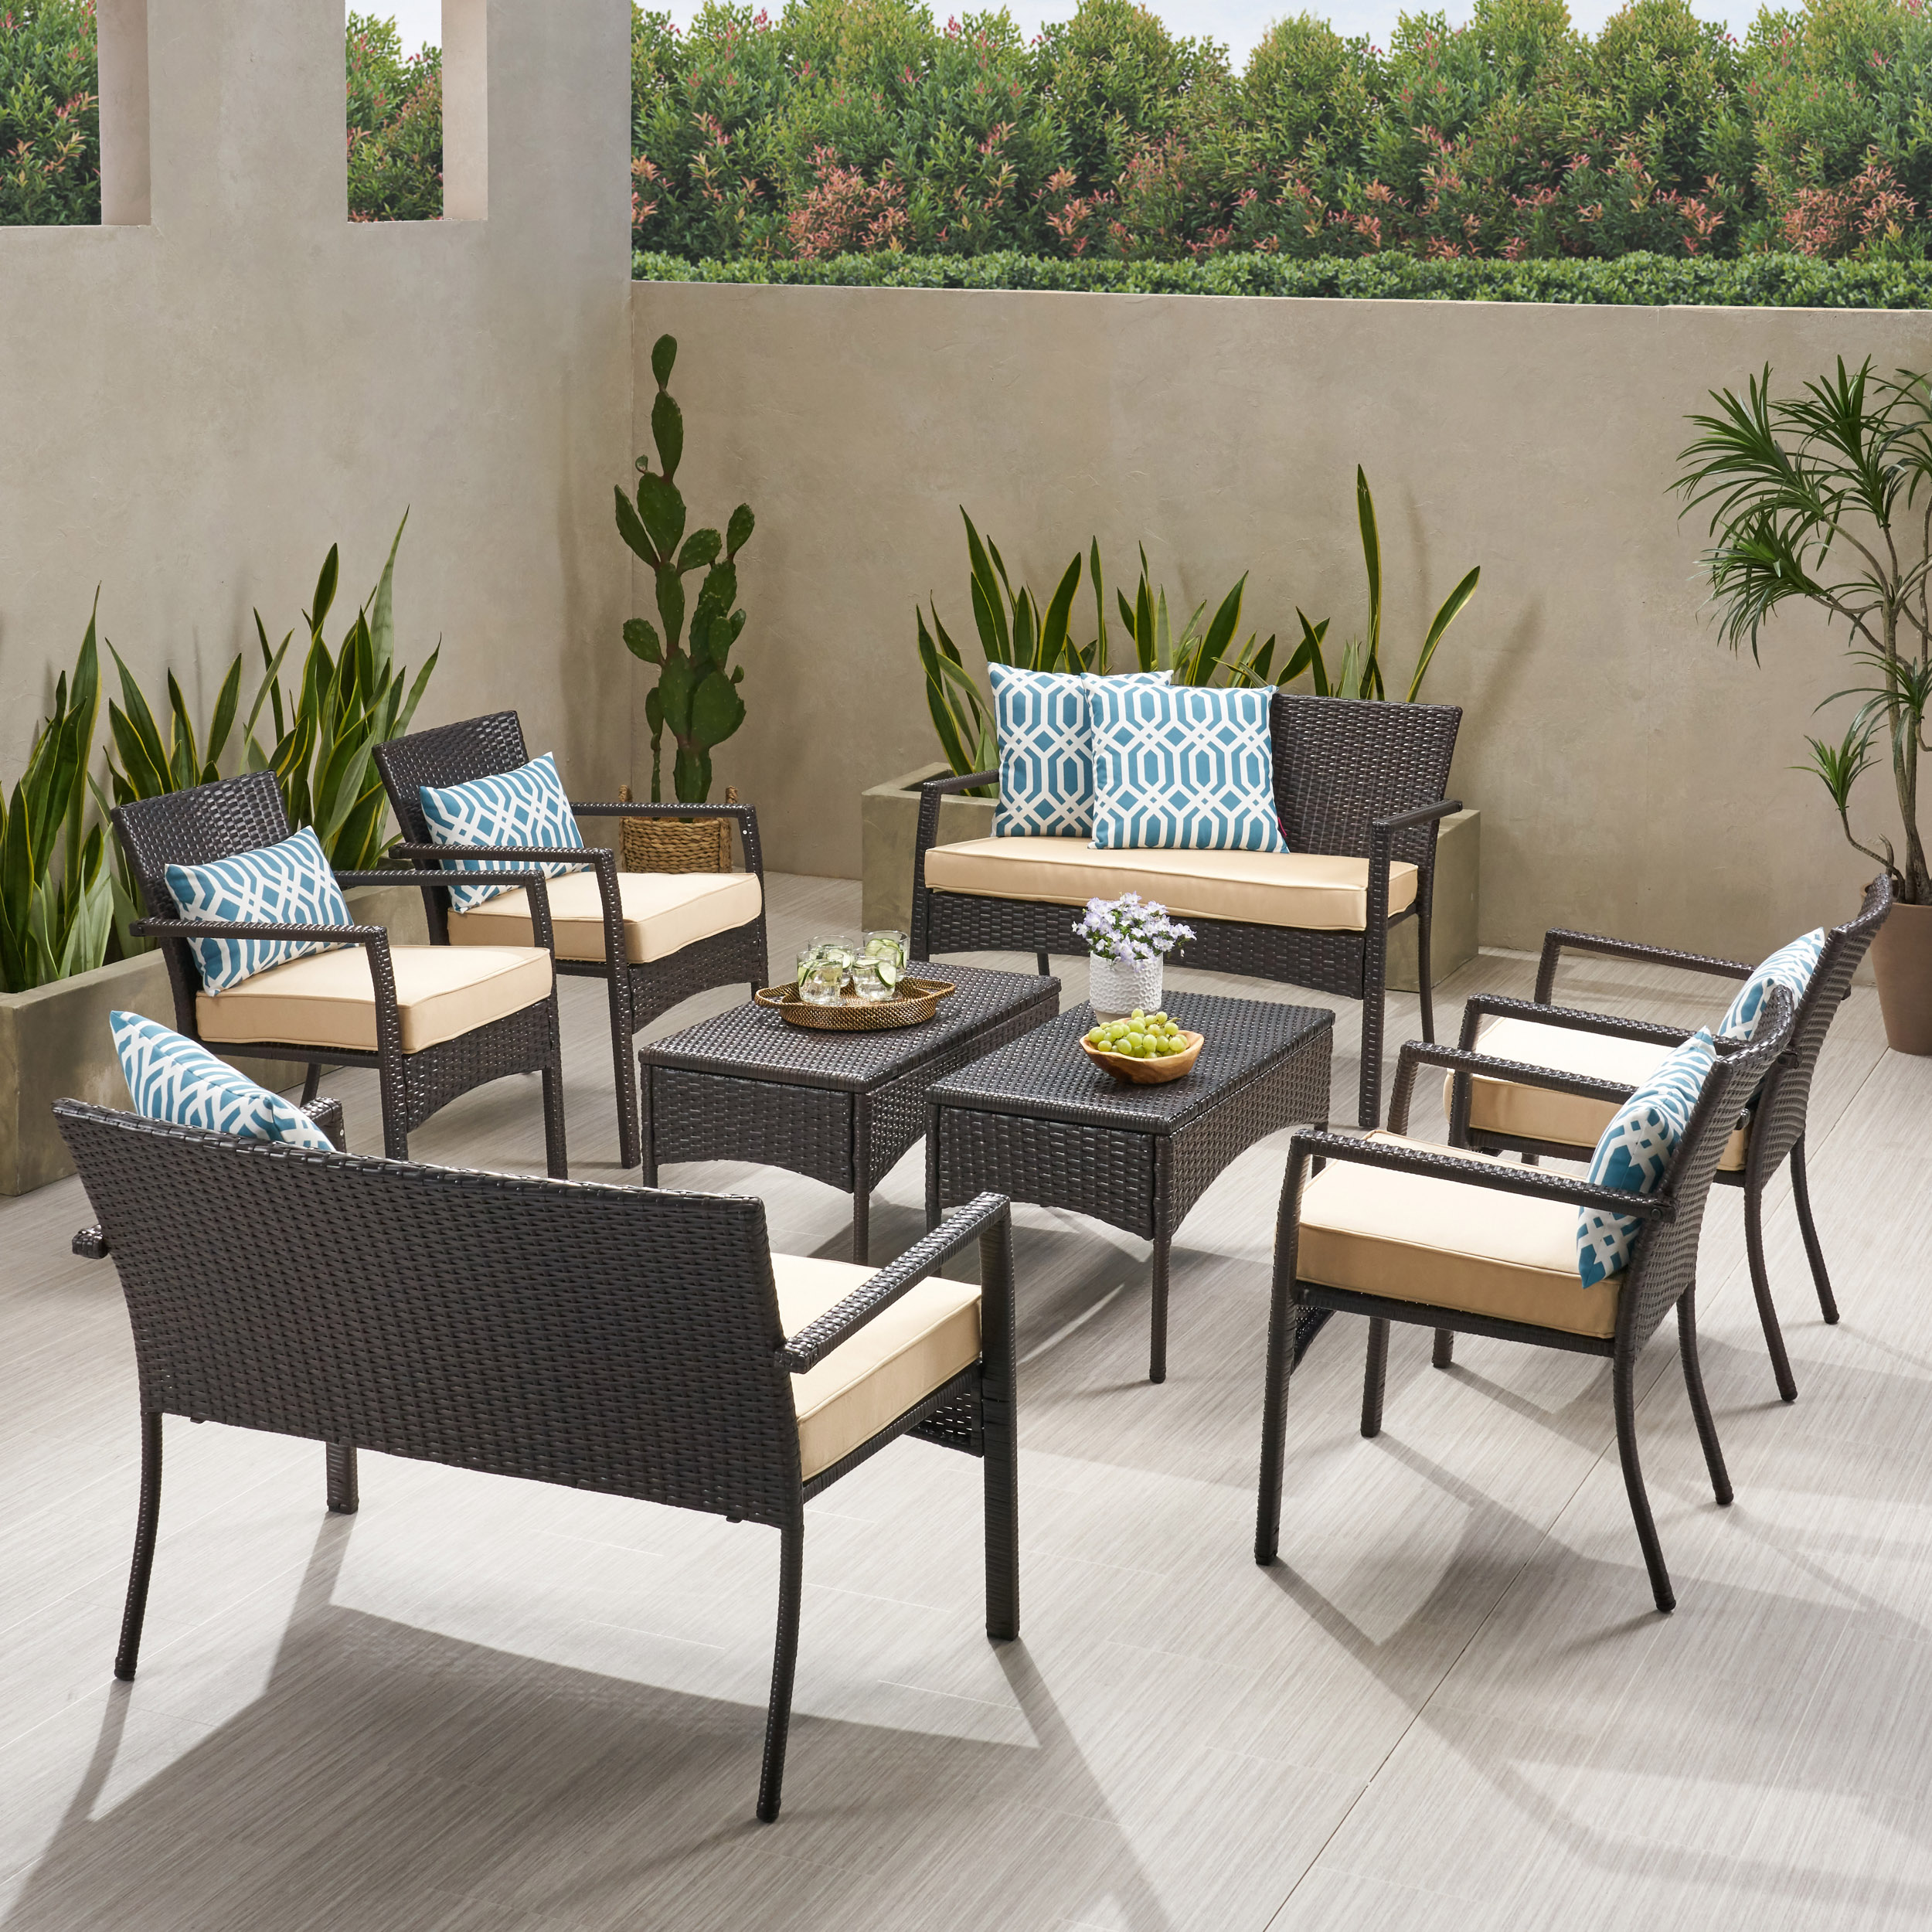 Fijian Outdoor 8 Seater Wicker Chat Set with Cushions, Multibrown and Dark Cream - image 2 of 10